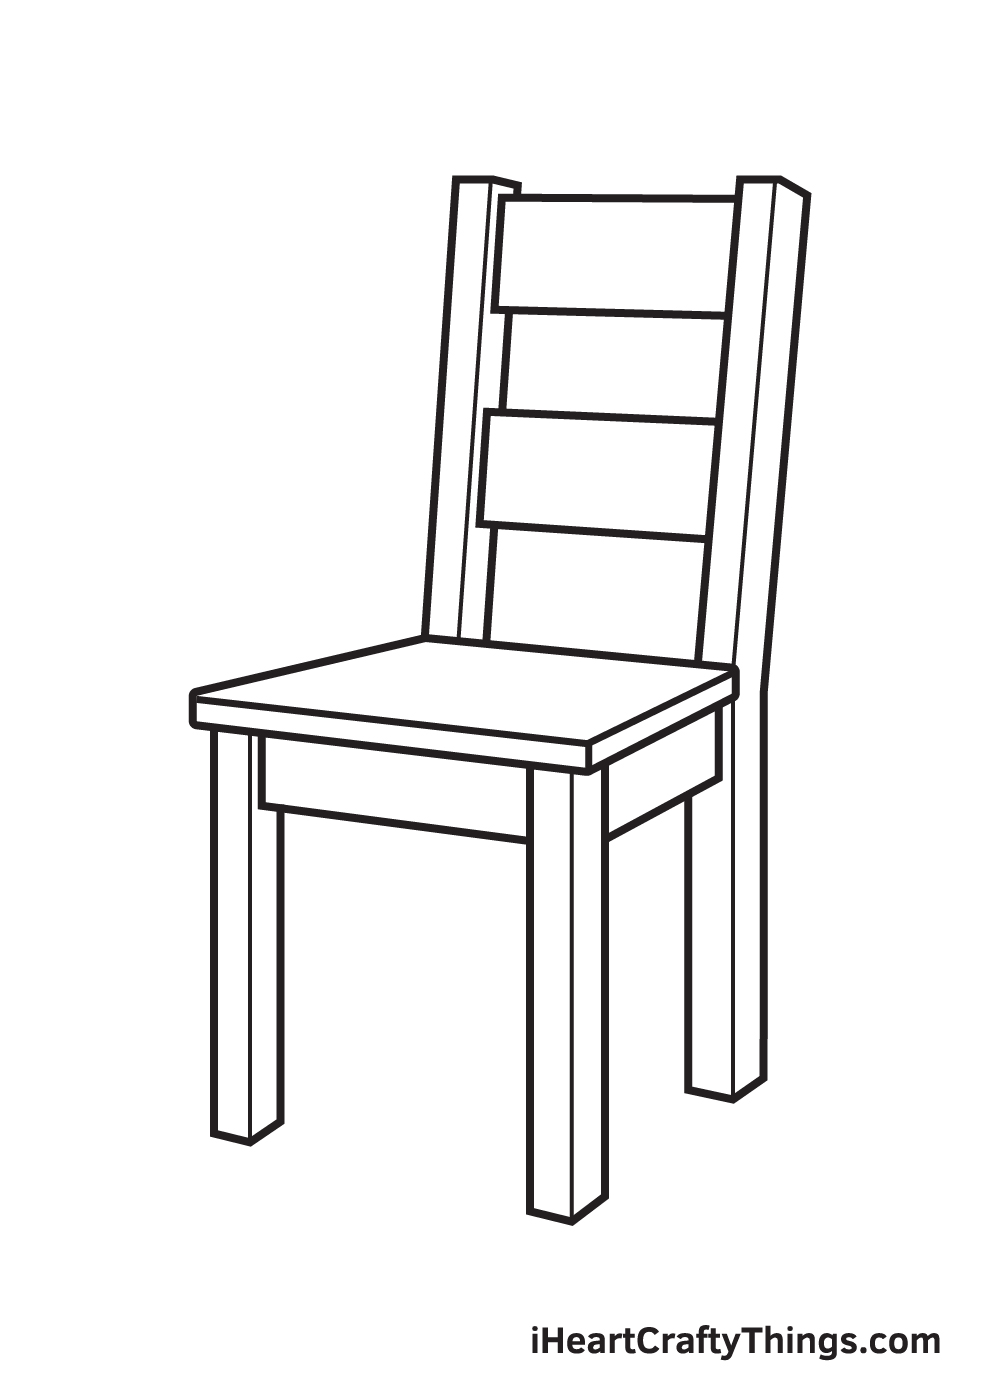 Drawing a chair - Step 7